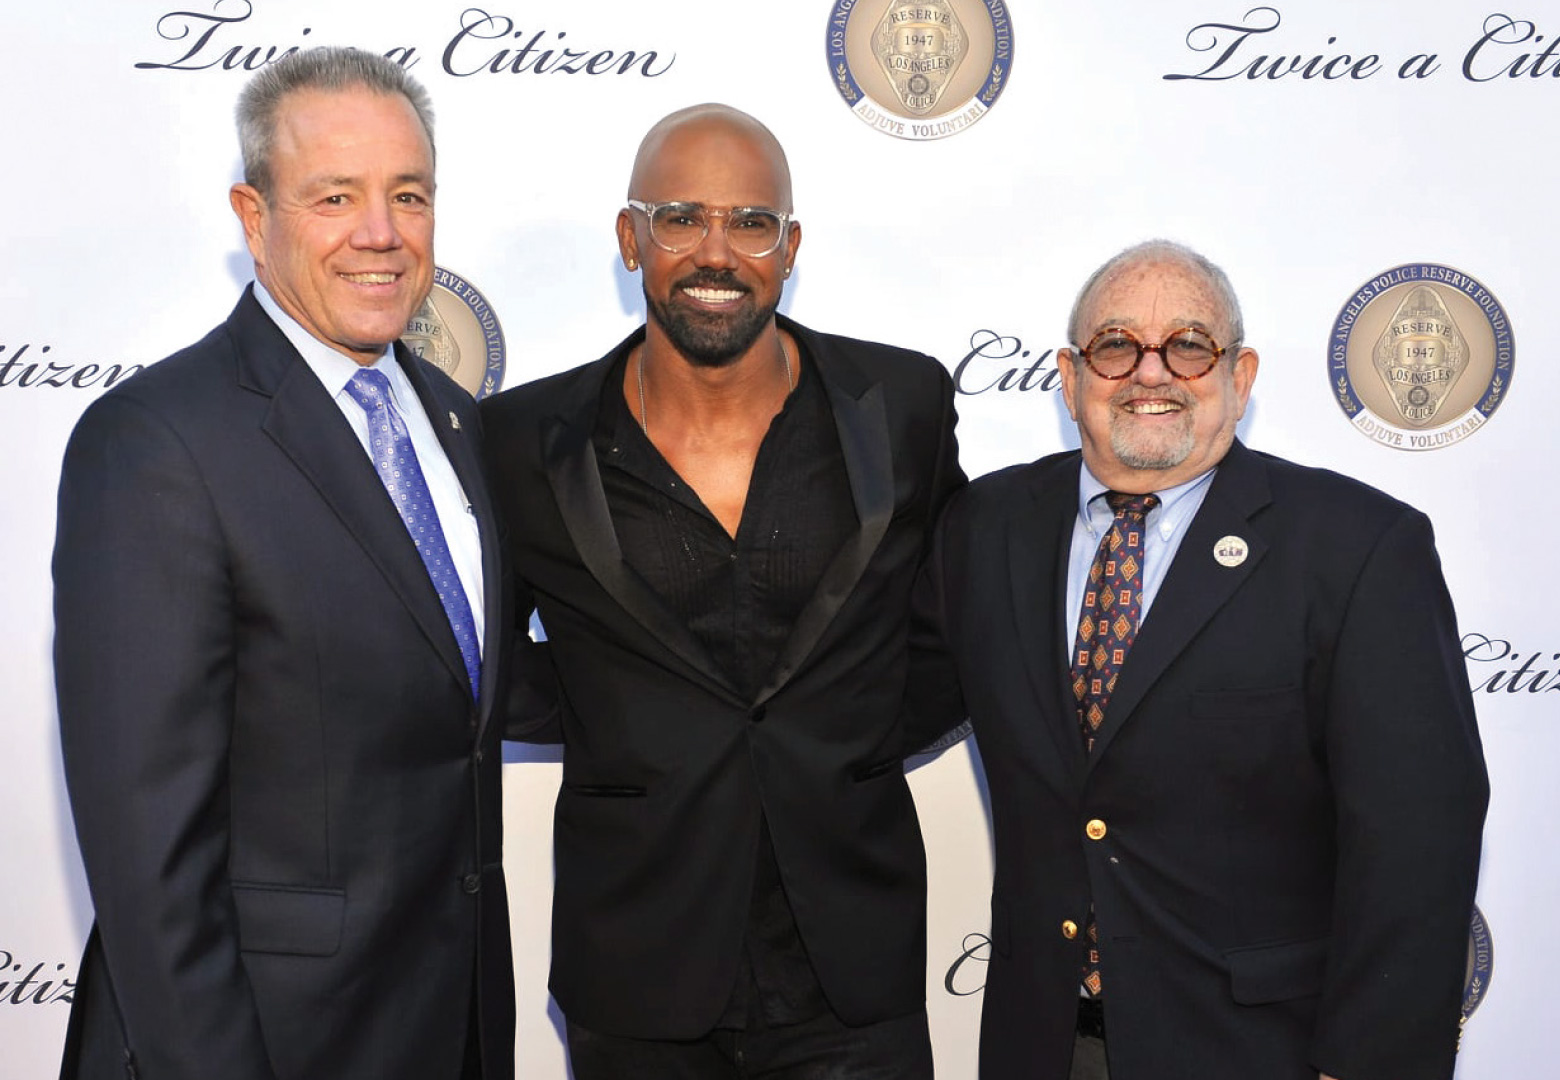 skirball-reopens-reserve-officer-of-the-year-twice-a-citizen-gala-32